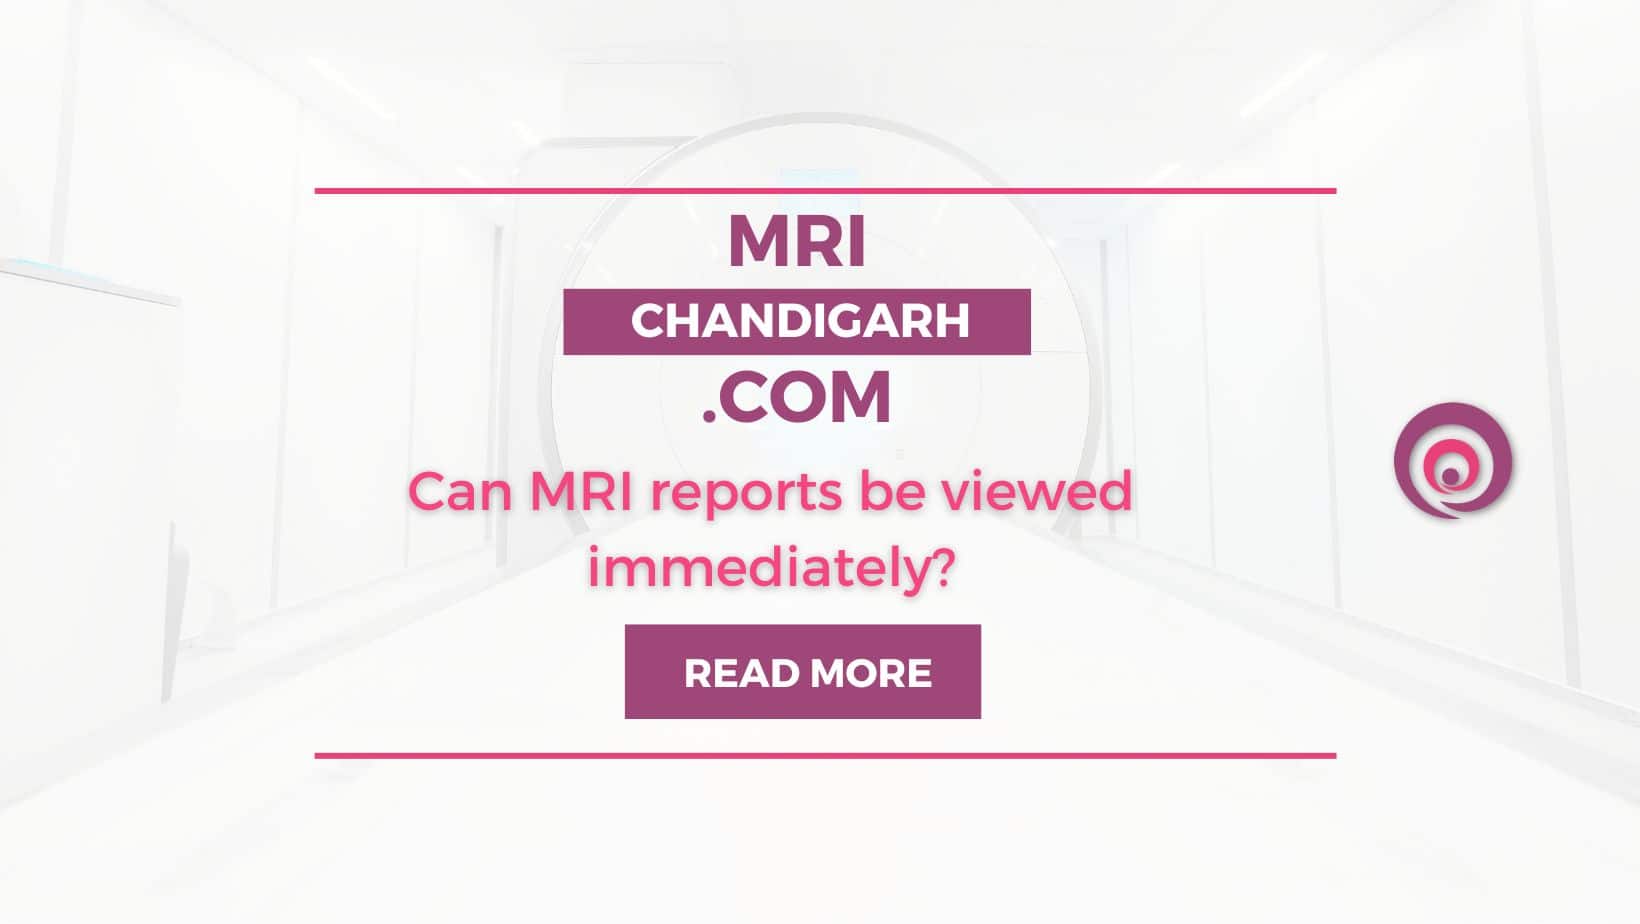 Can MRI reports be viewed immediately?